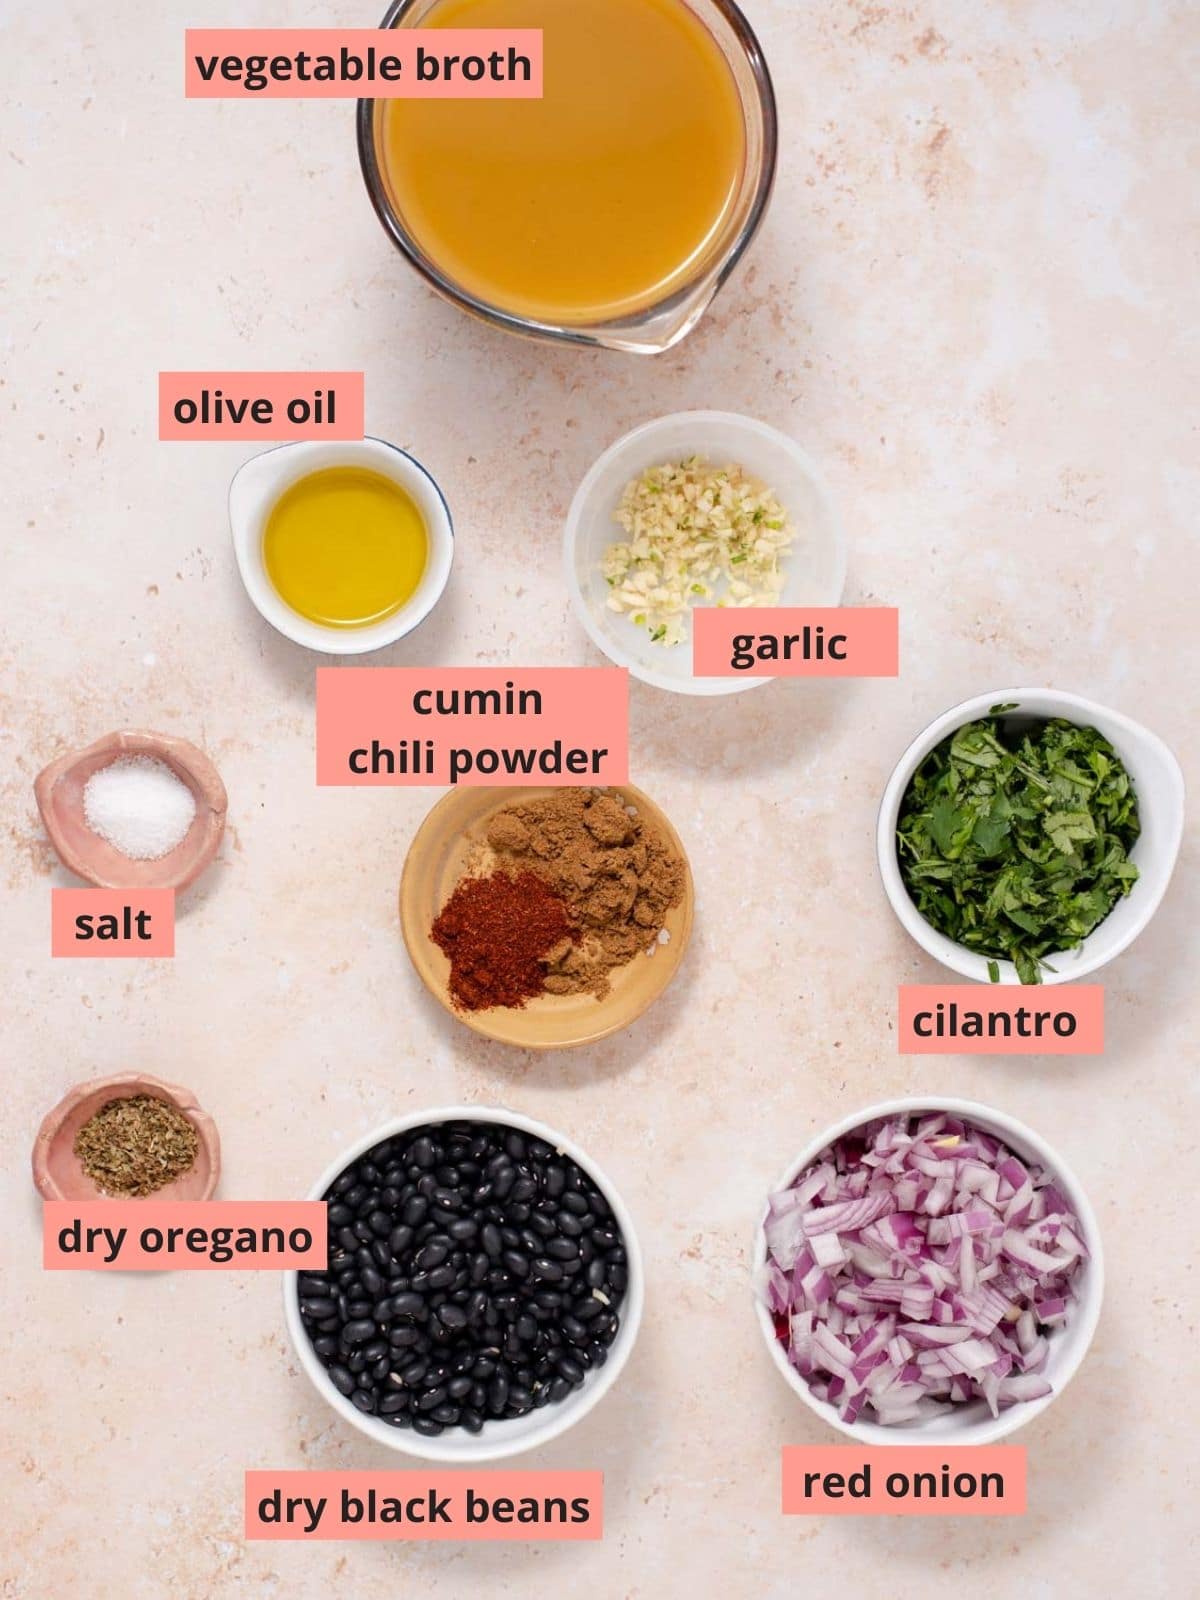 Labeled ingredients used to make black beans